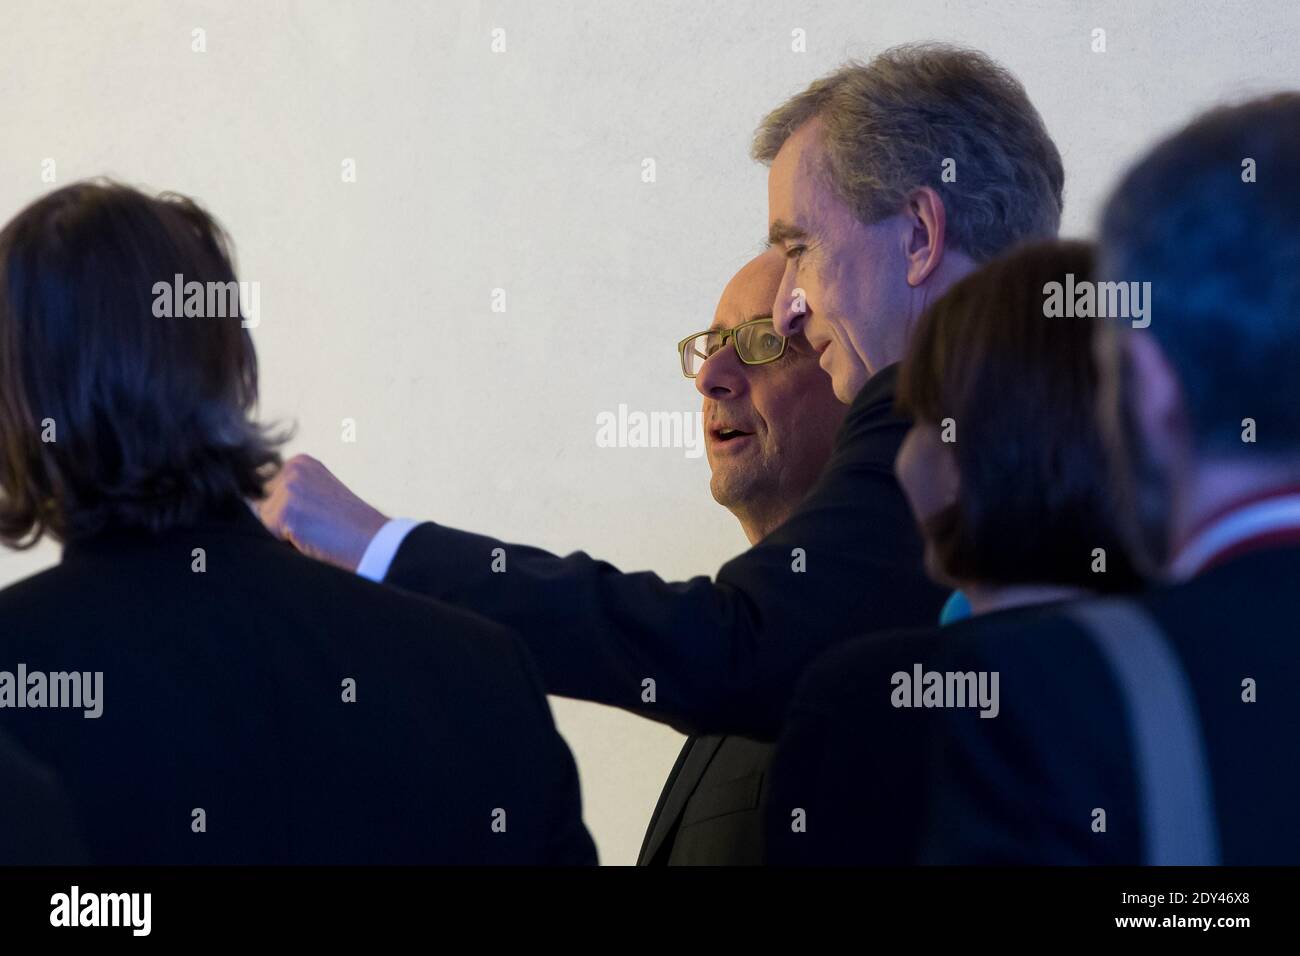 Bernard Arnault Ceo Moet Hennessy Louis Vuitton Mhlv Seen Ground – Stock  Editorial Photo © ChinaImages #245105616